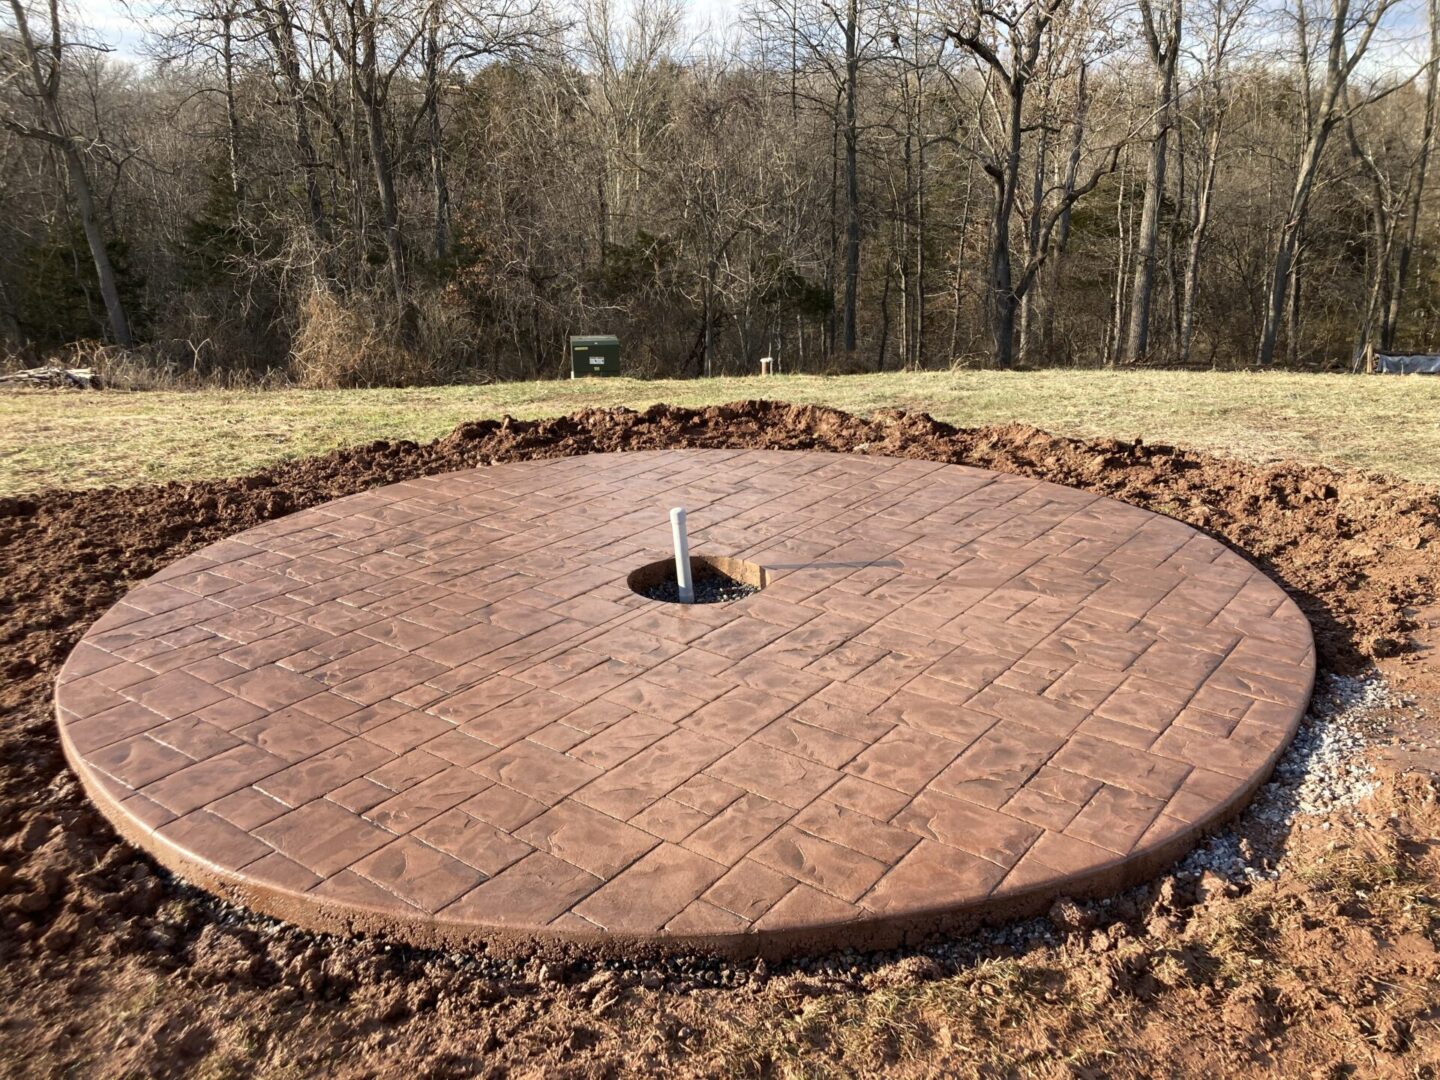 A brick circle with a hole in it